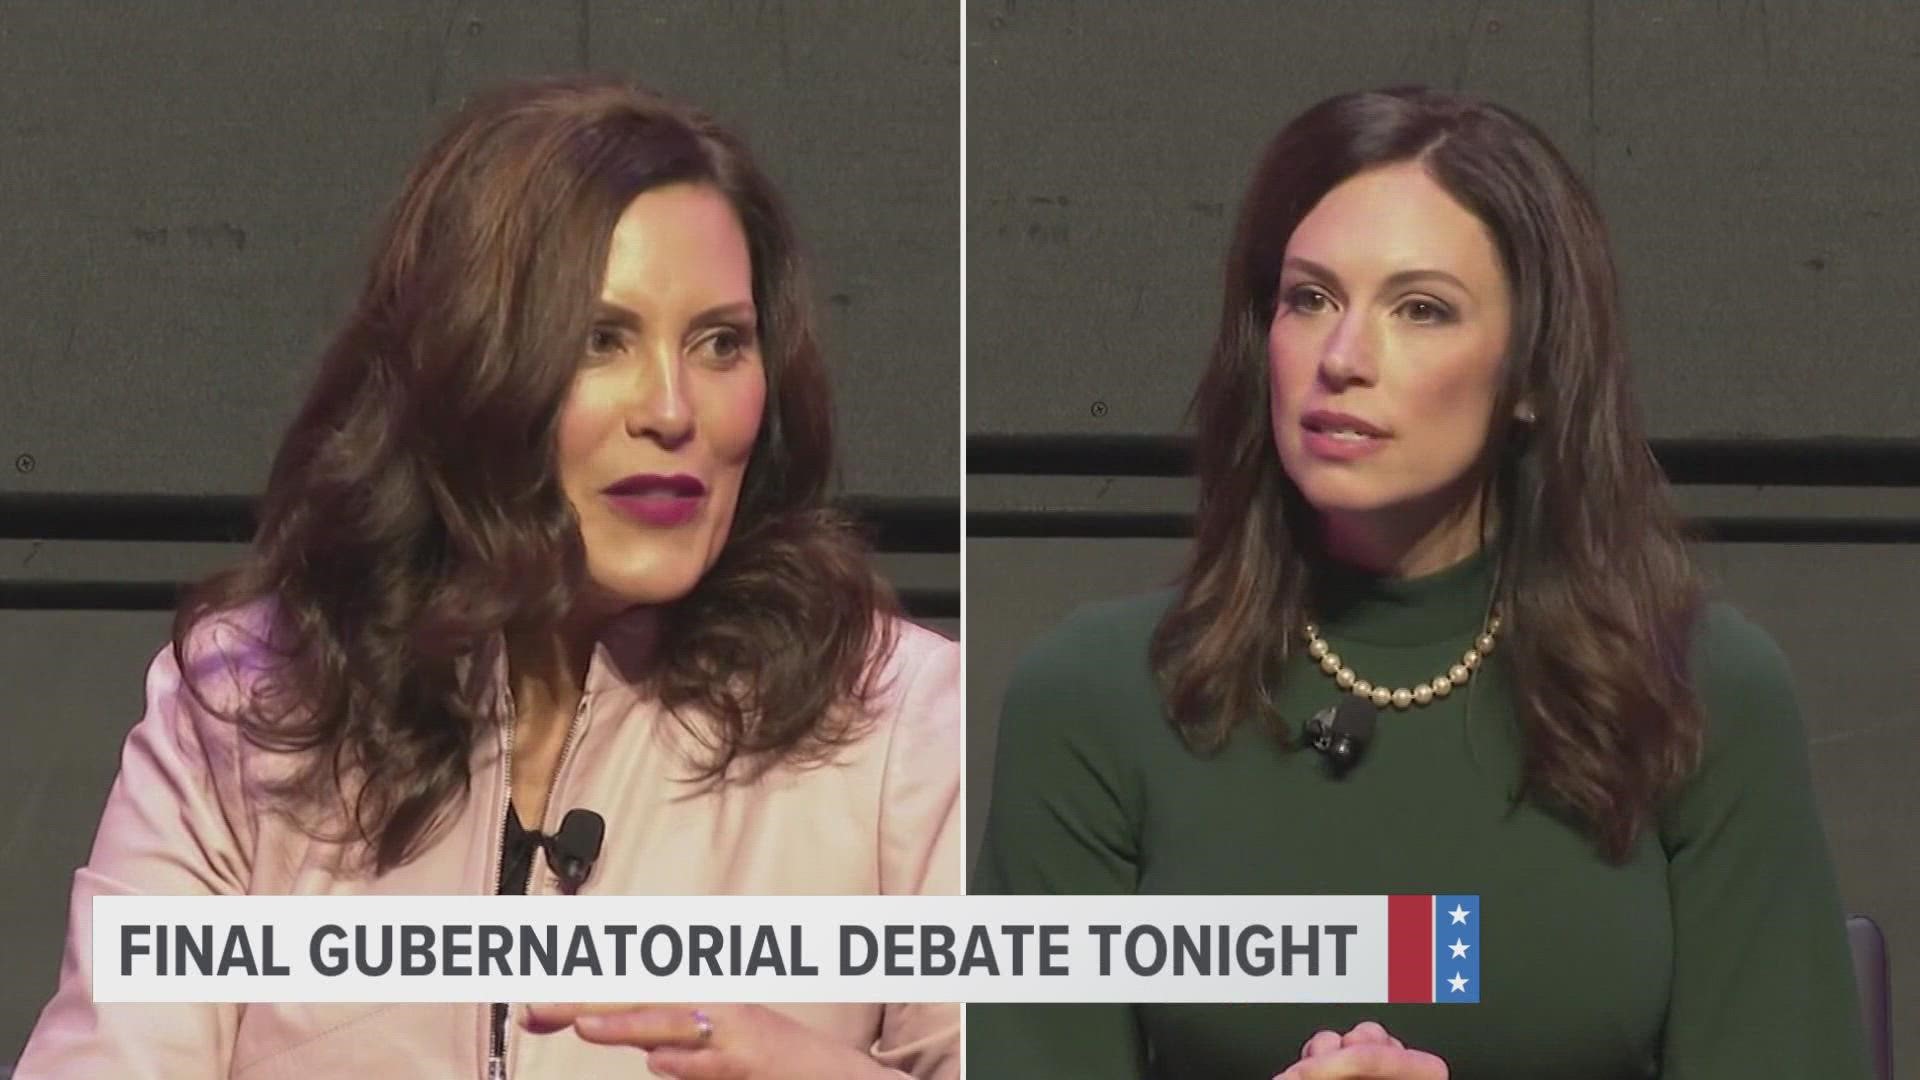 Gov. Gretchen Whitmer and Republican challenger Tudor Dixon will debate Tuesday for the final time, just two weeks before the election.